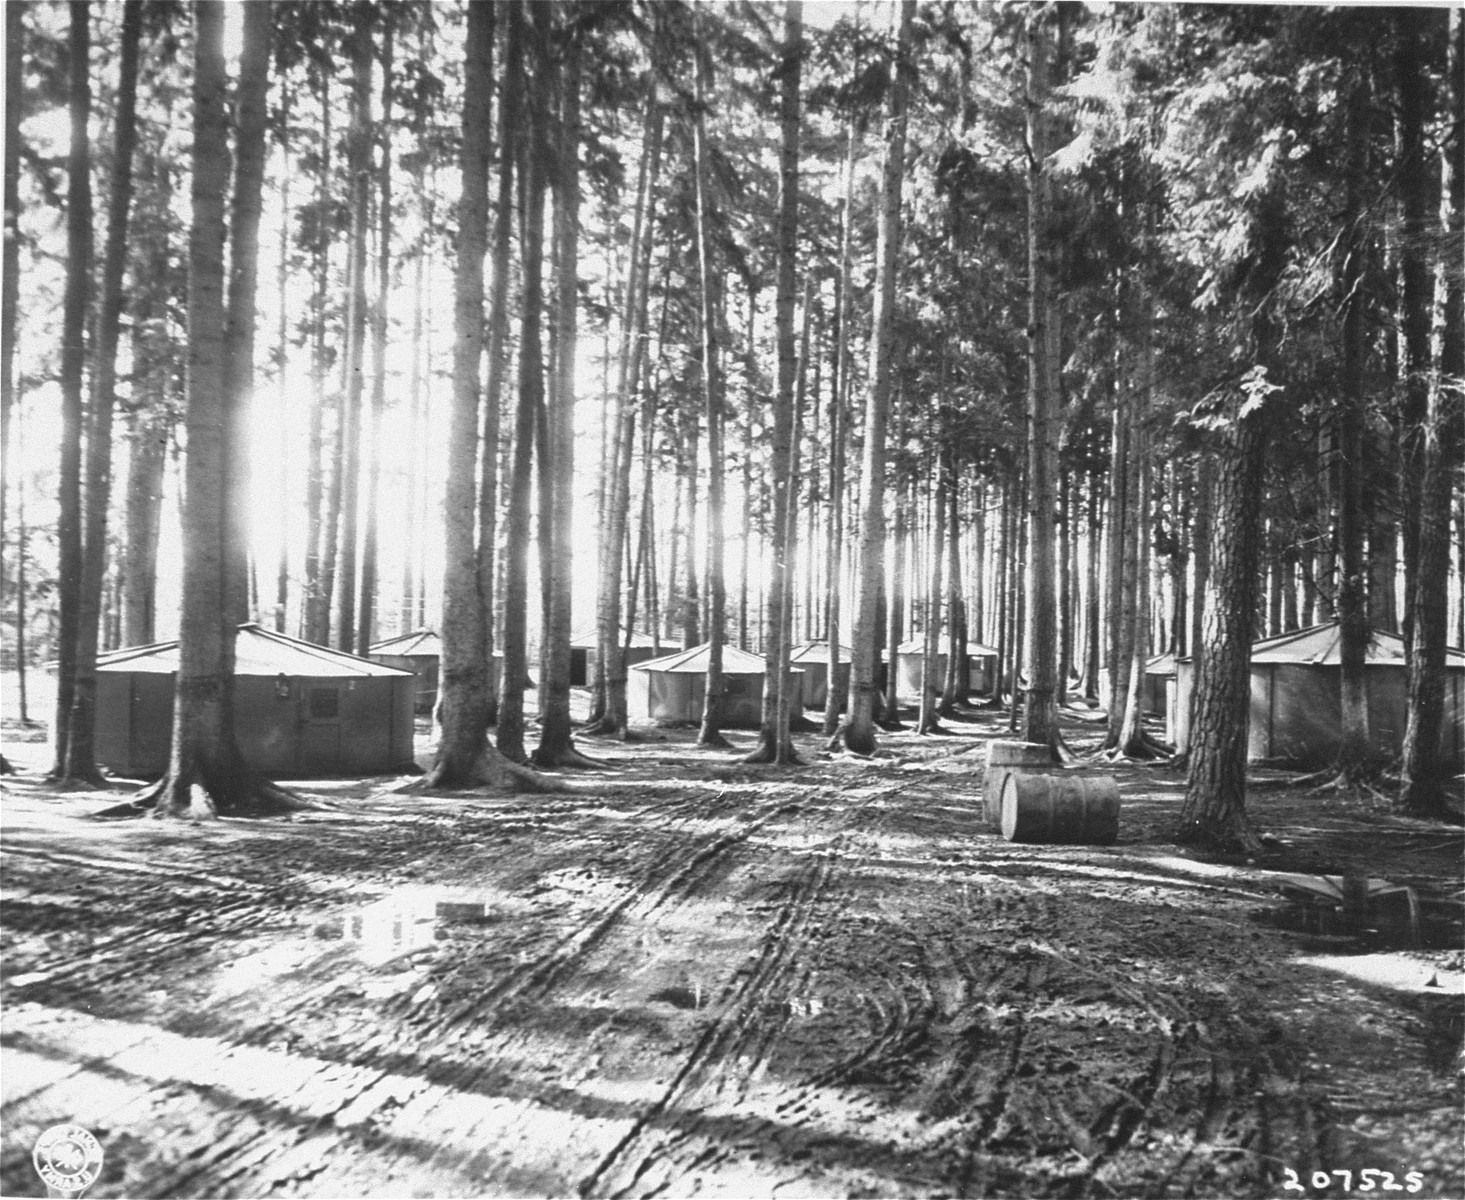 "Finnish huts", which housed between 30 and 40 people each, in Waldlager V.  The camp held about 4000 prisoners, nearly all Jewish, and was liberated by the 14th Armoured Division, U.S. 3rd Army.